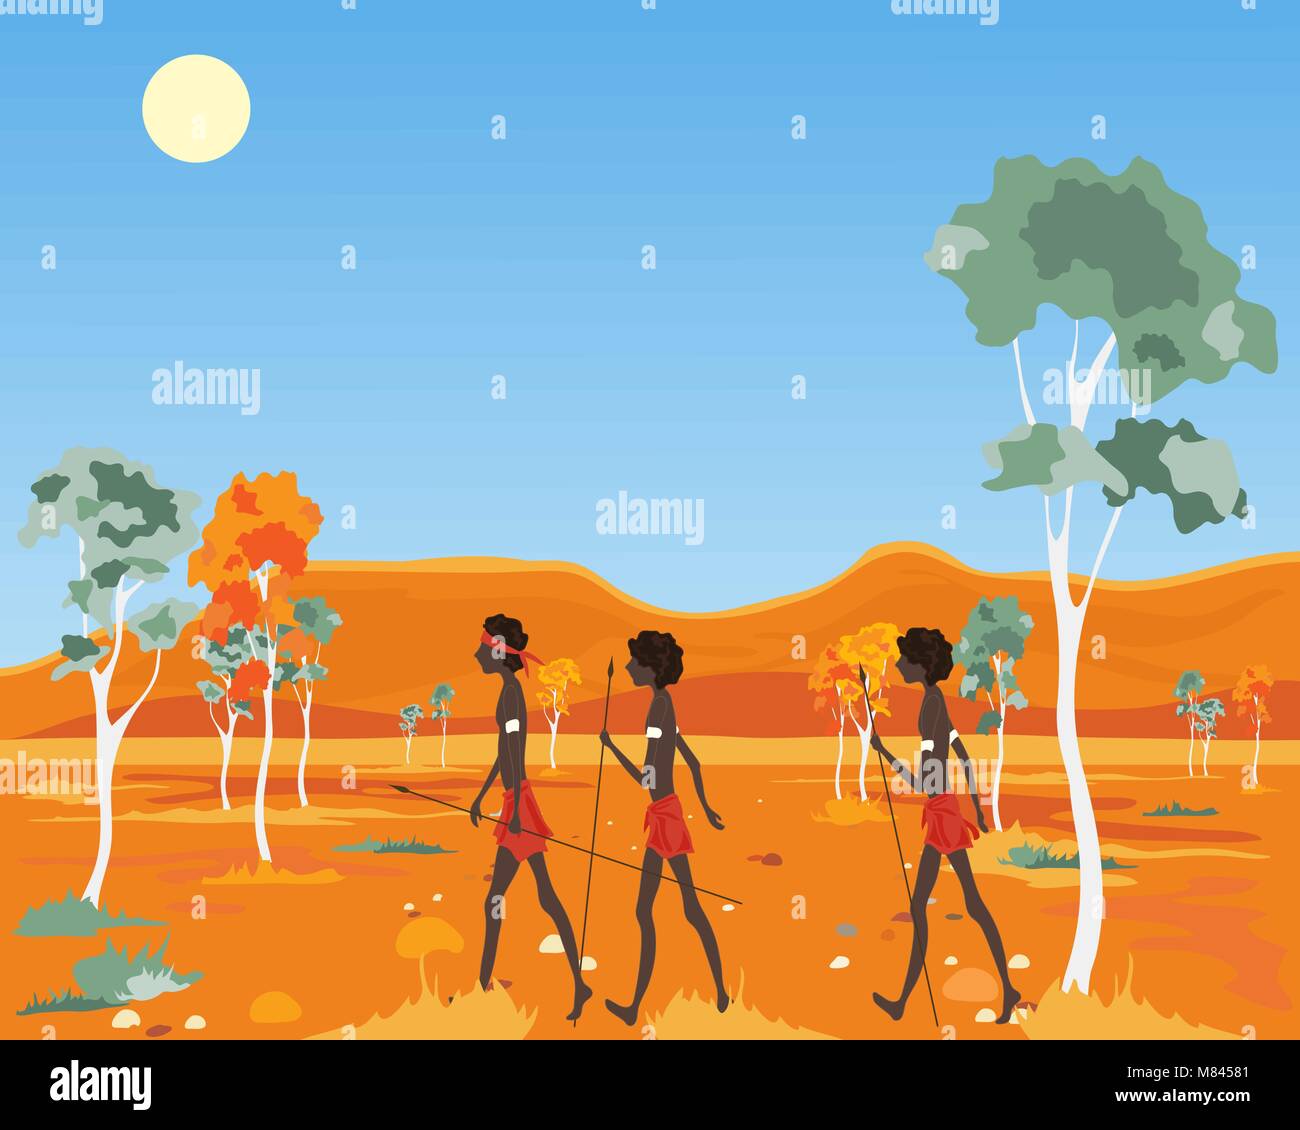 a vector illustration in eps 10 format of native Australian people walking across the outback in hot weather with eucalyptus trees rocks and mountains Stock Vector